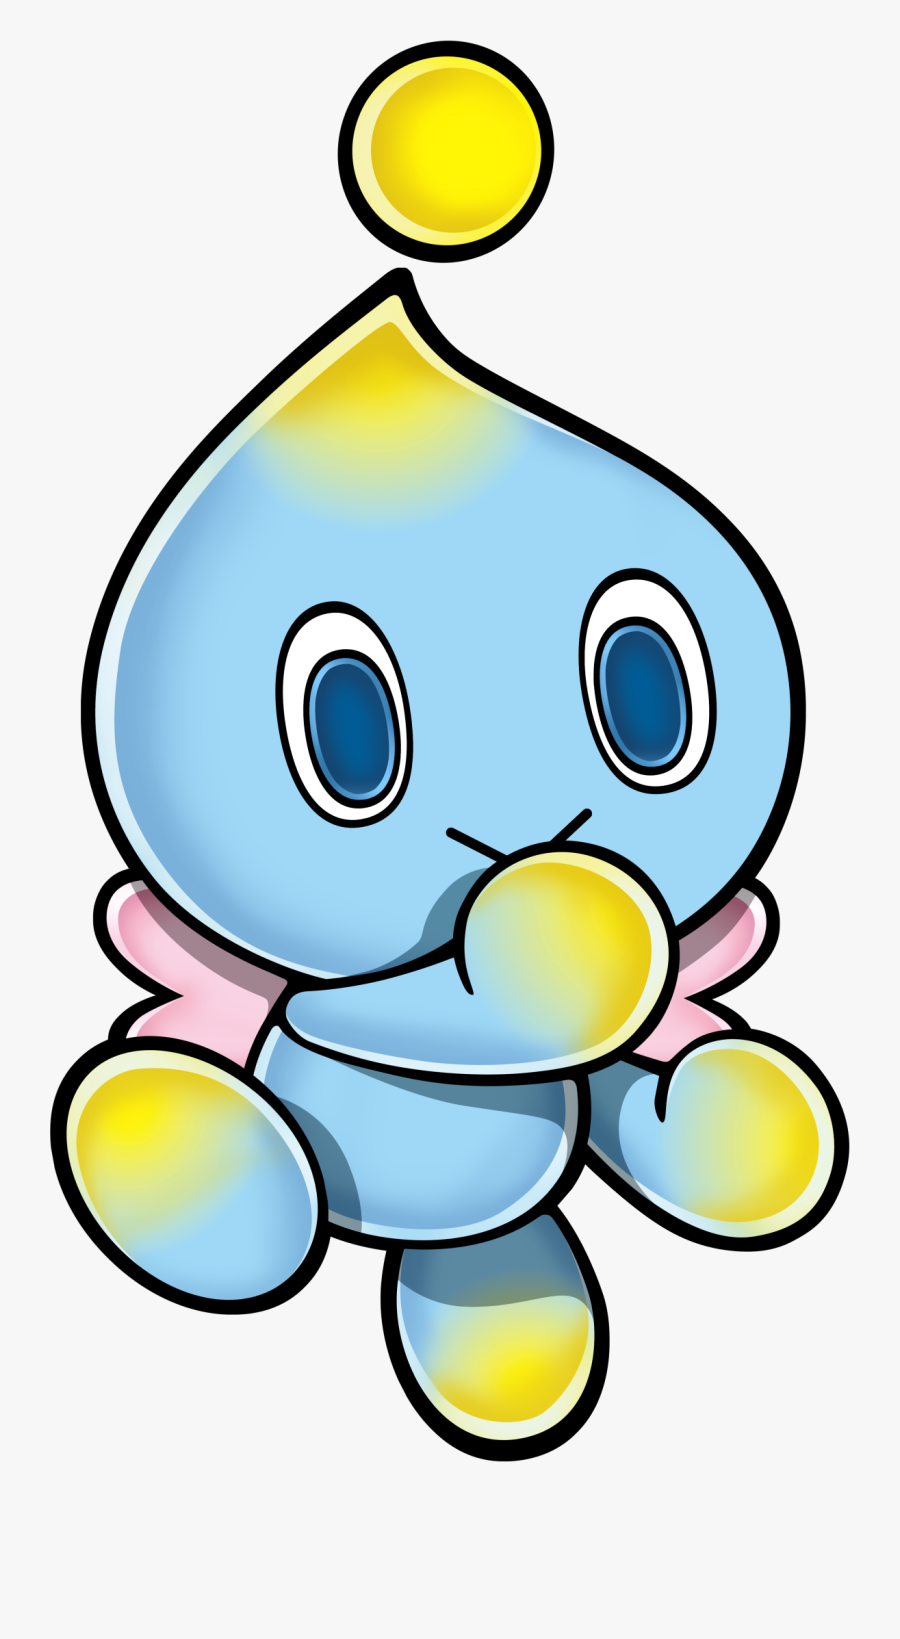 Chao-3 - Sonic Chao Png, Transparent Clipart